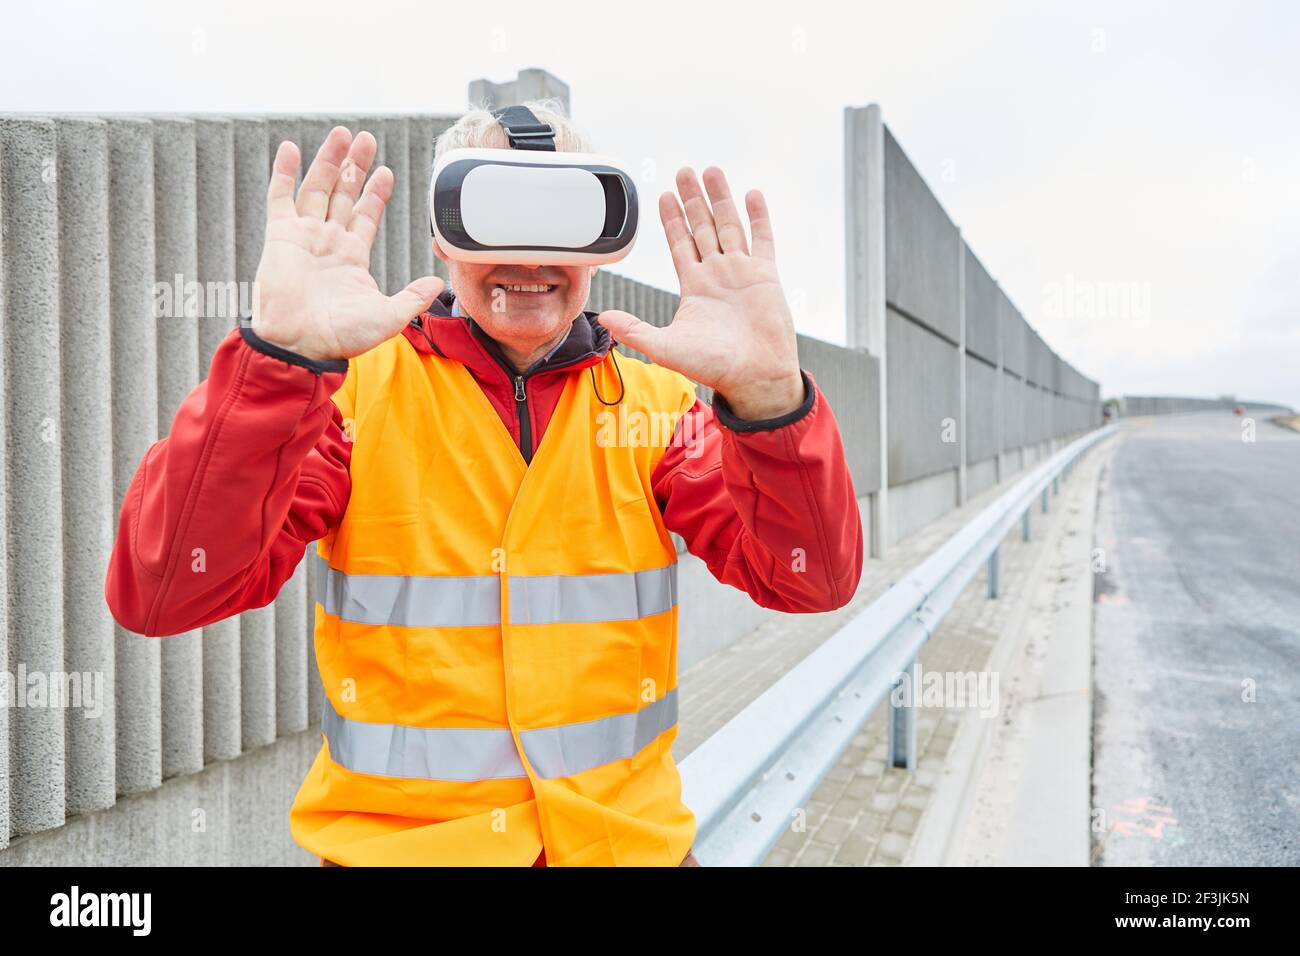 Construction worker uses visualization of the construction site through VR glasses for road construction planning Stock Photo